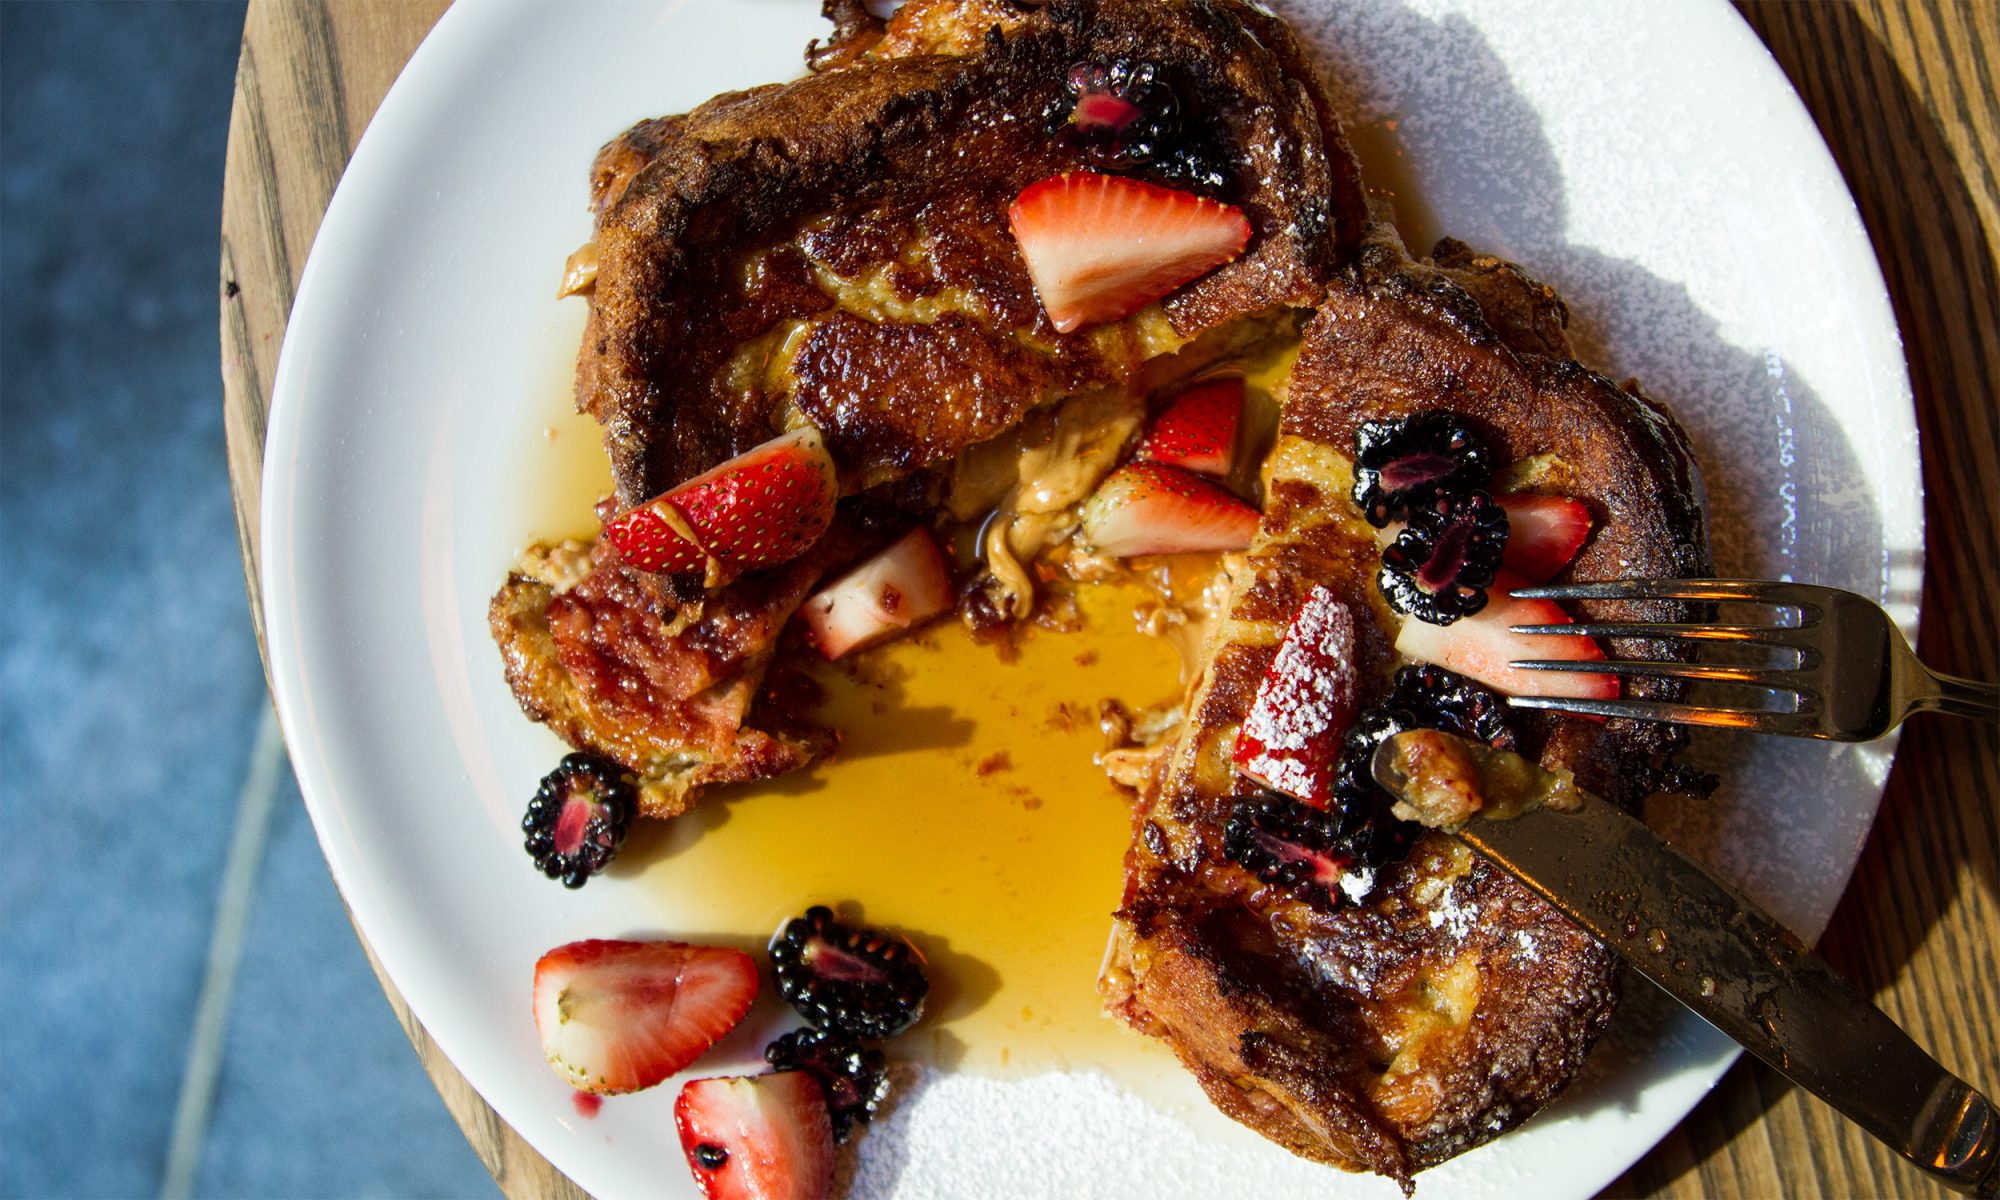 EC: Peanut Butter and Jelly Pain Perdu Is So Much More Than Stuffed French Toast